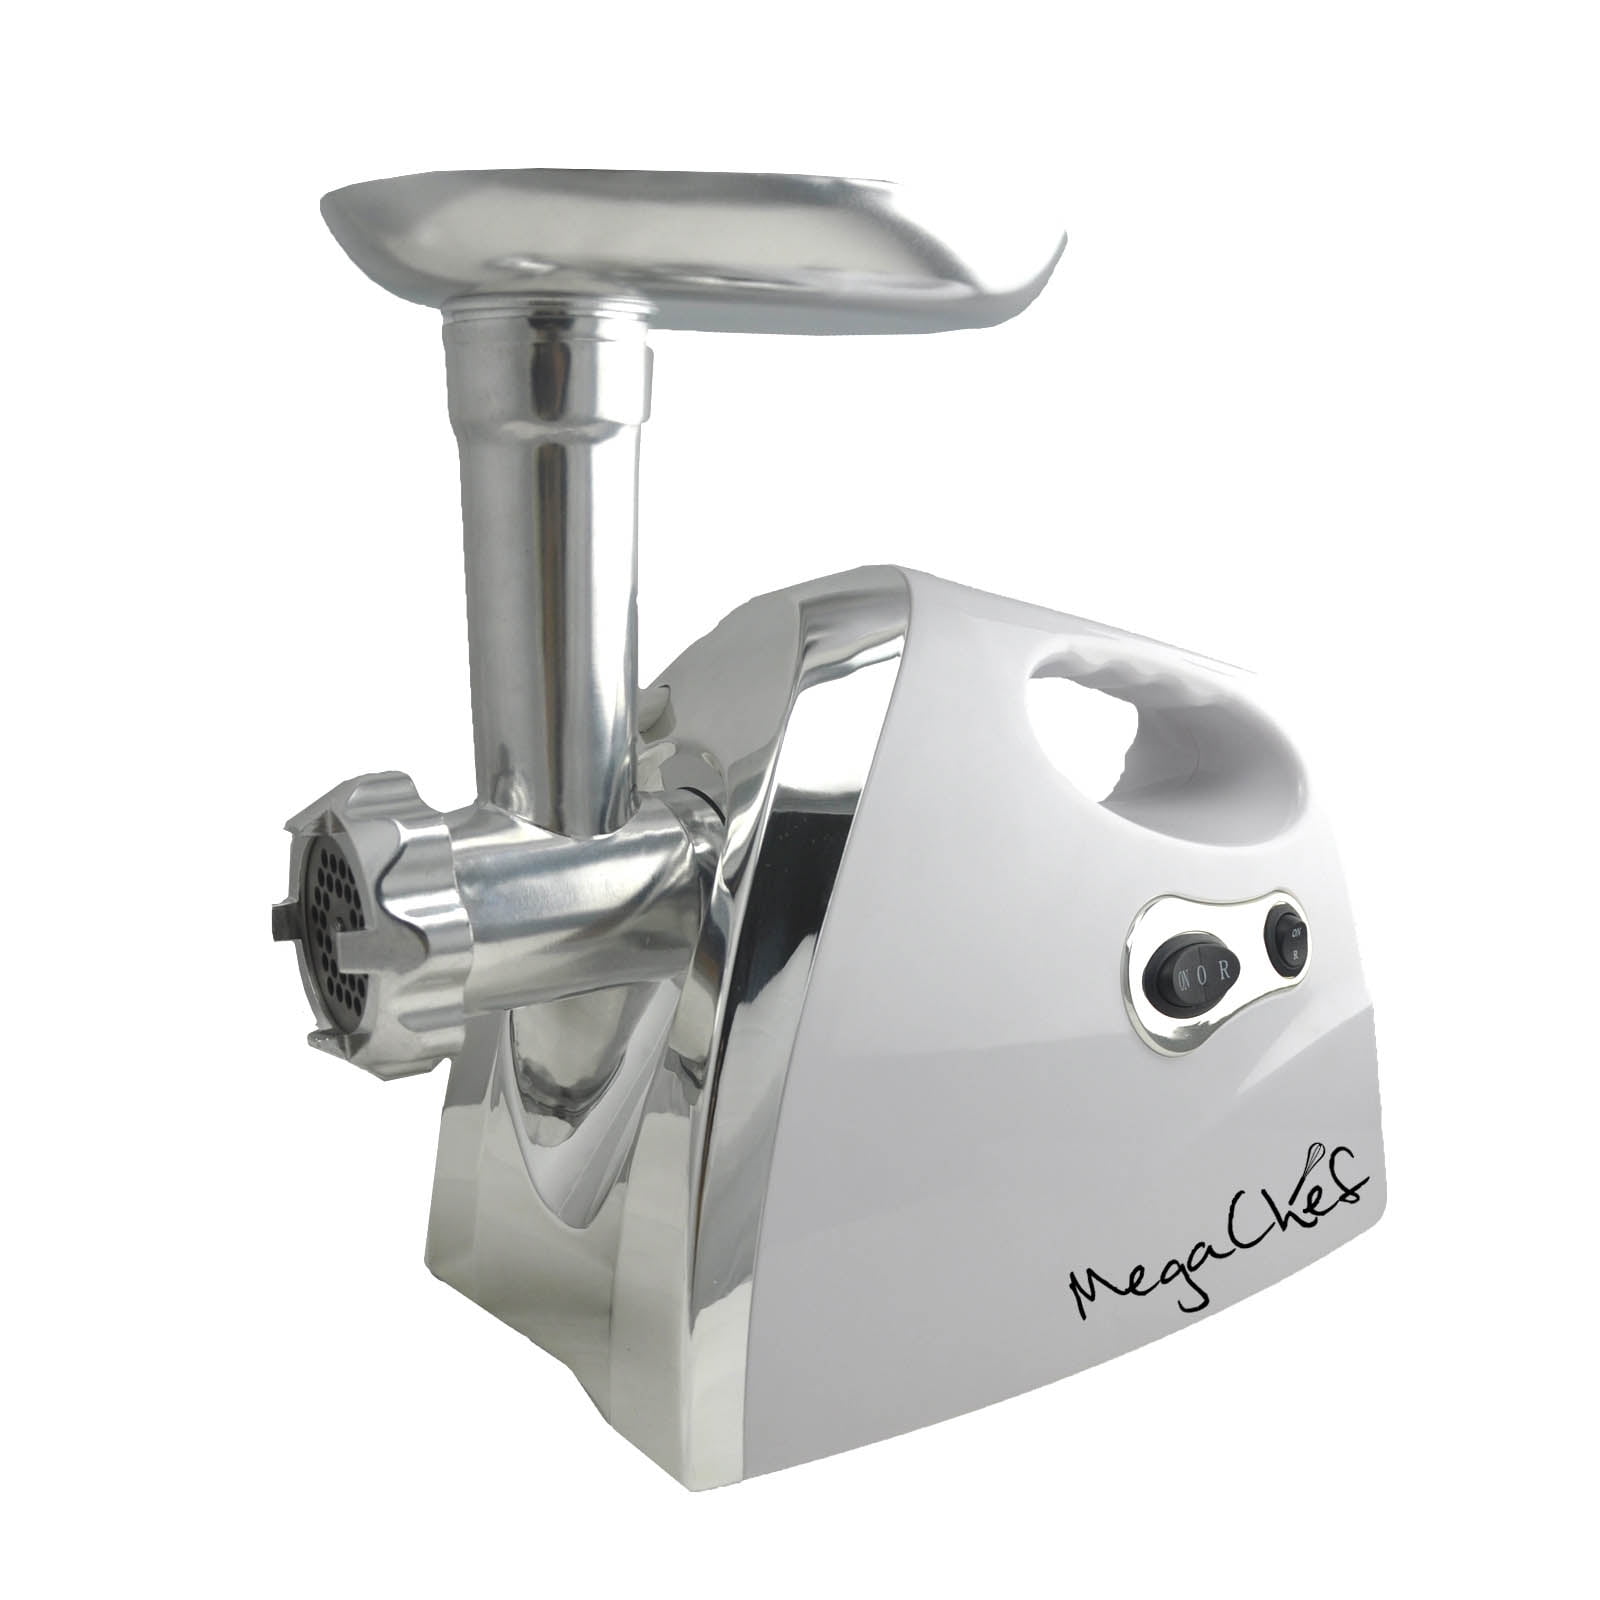 MegaChef MG-700 1200W Ultra Powerful Automatic Meat Grinder for Household Use 